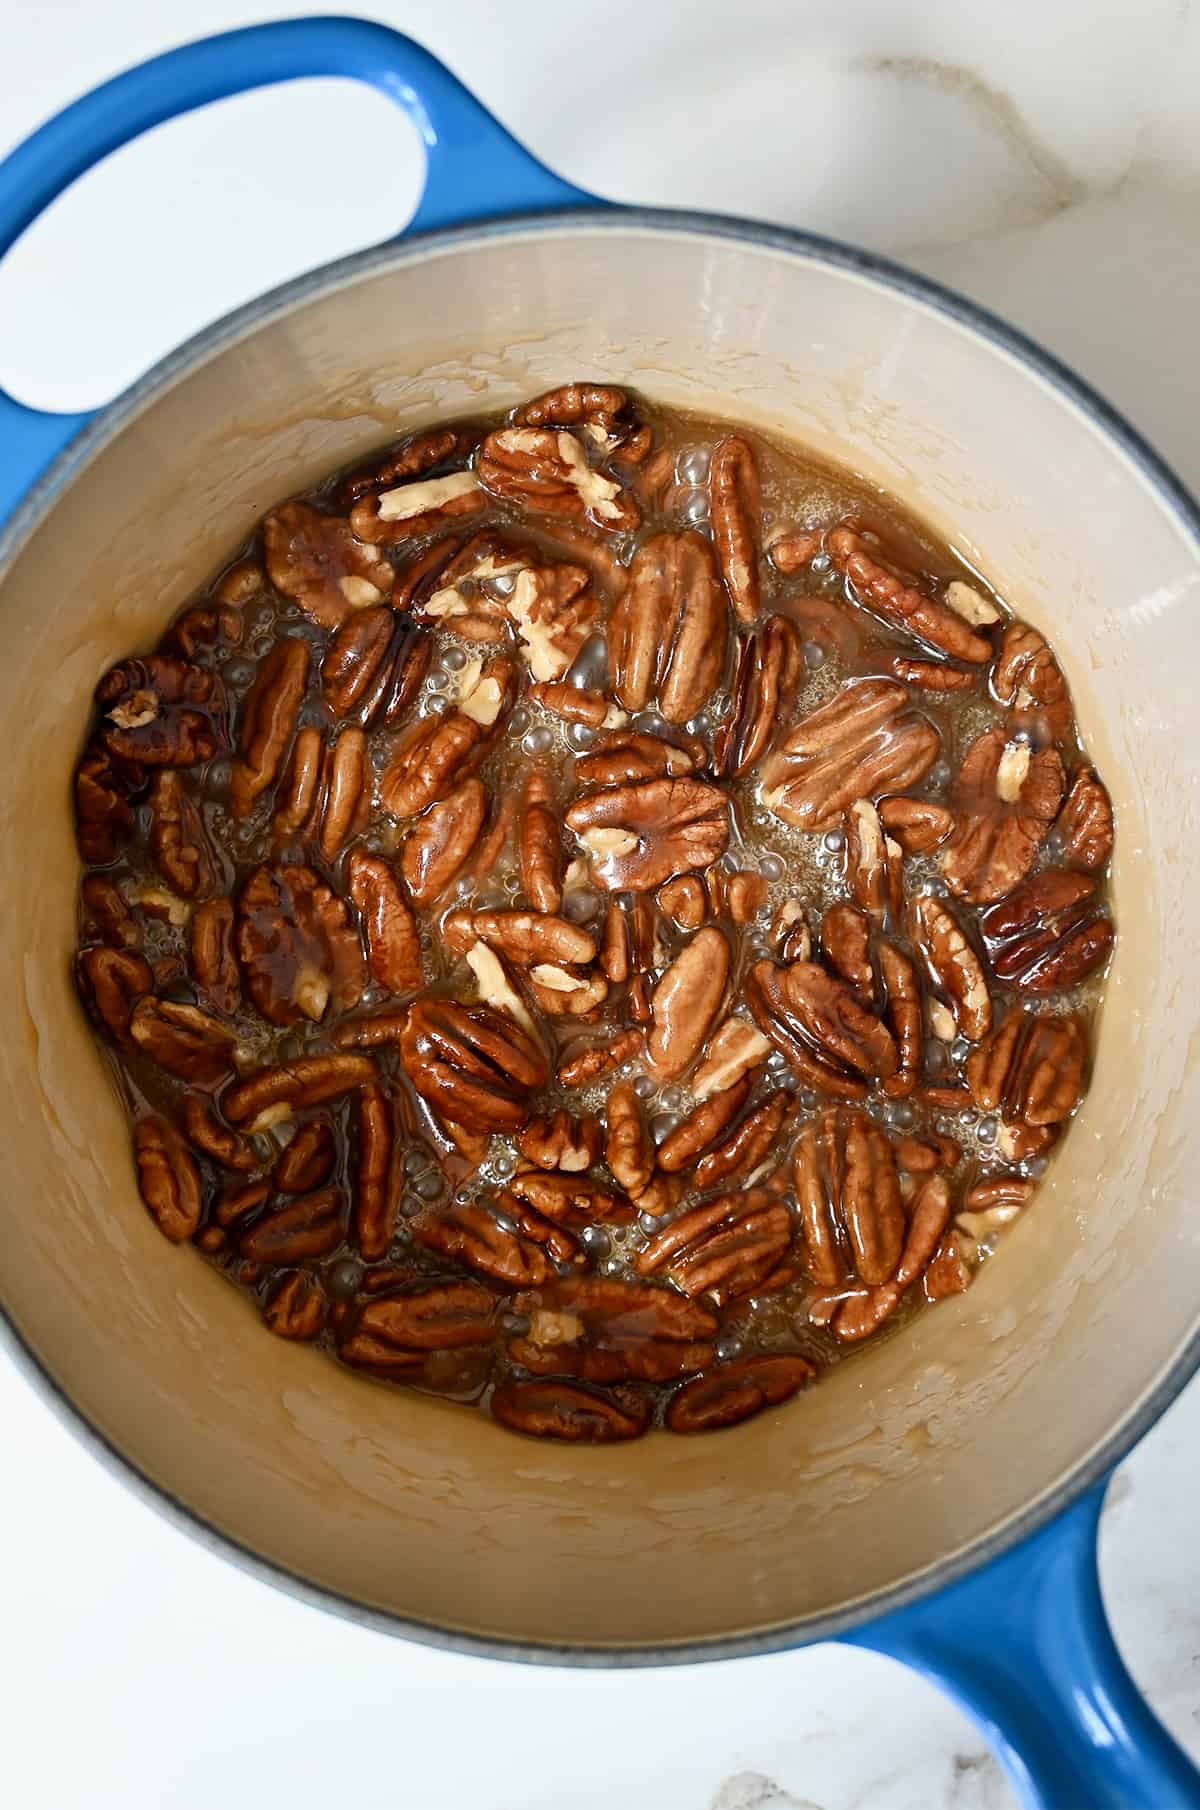 A saucepan containing halved pecans in a caramel-like mixture.